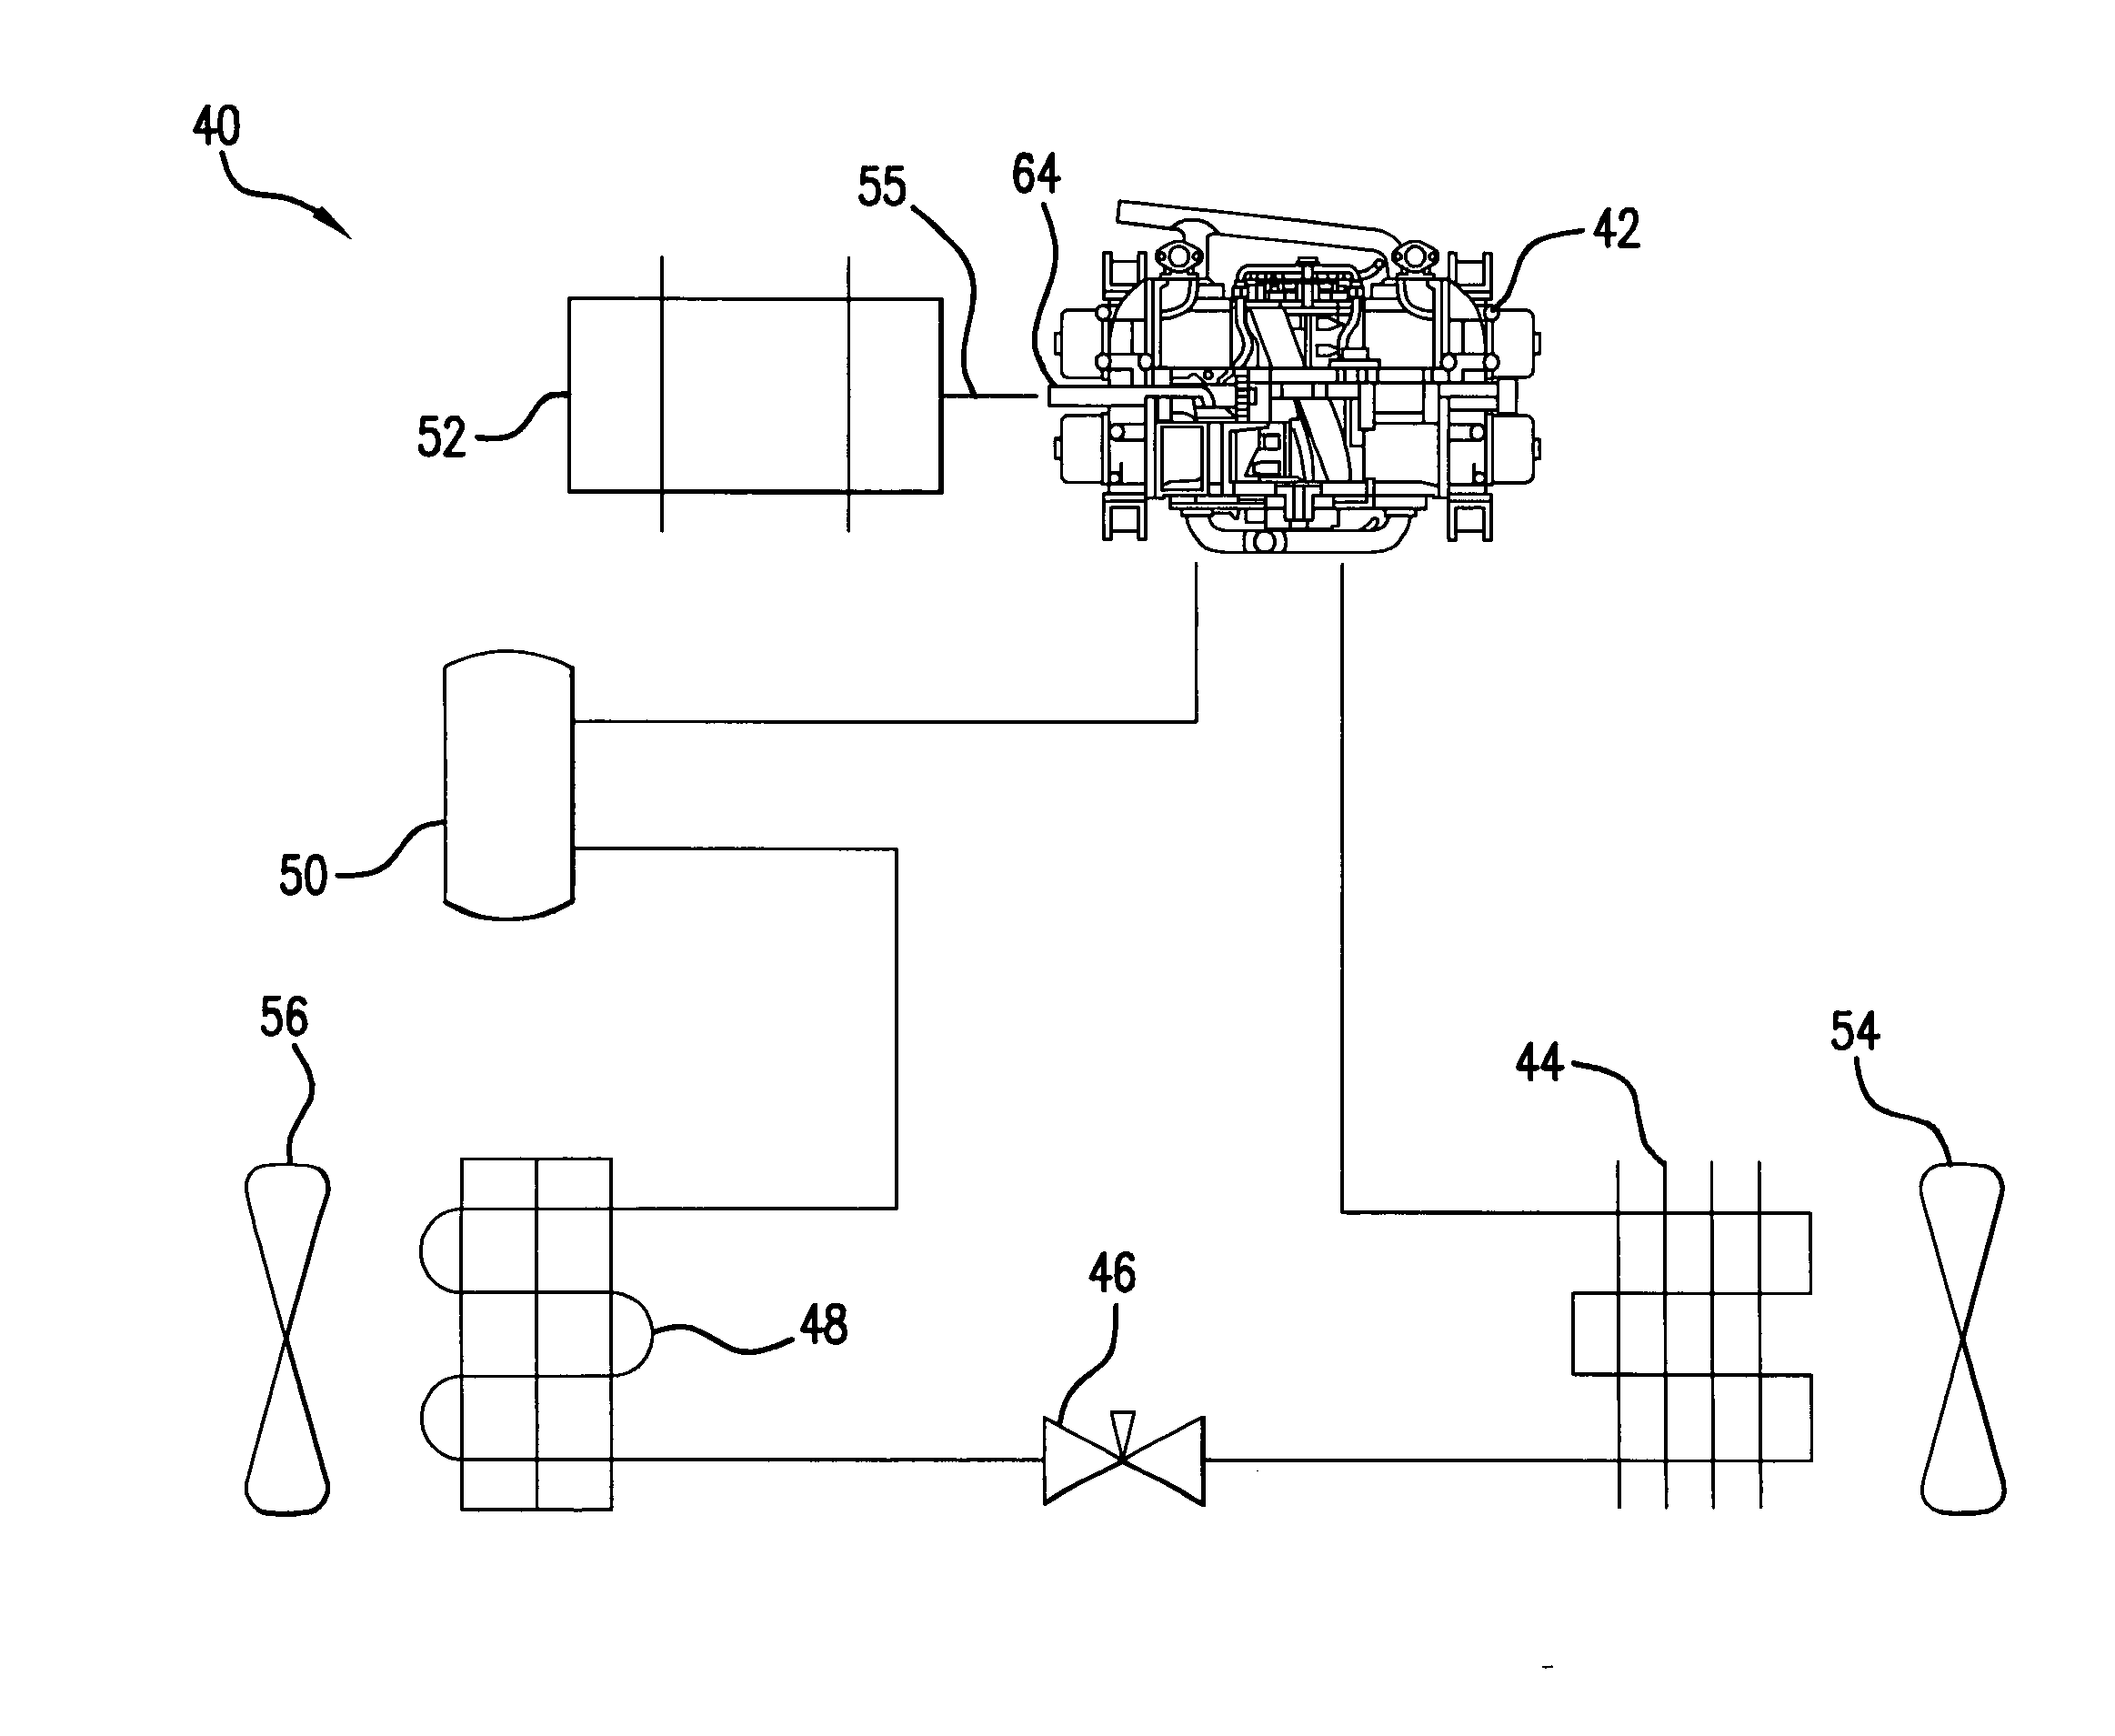 Evaporator apparatus and method for modulating cooling